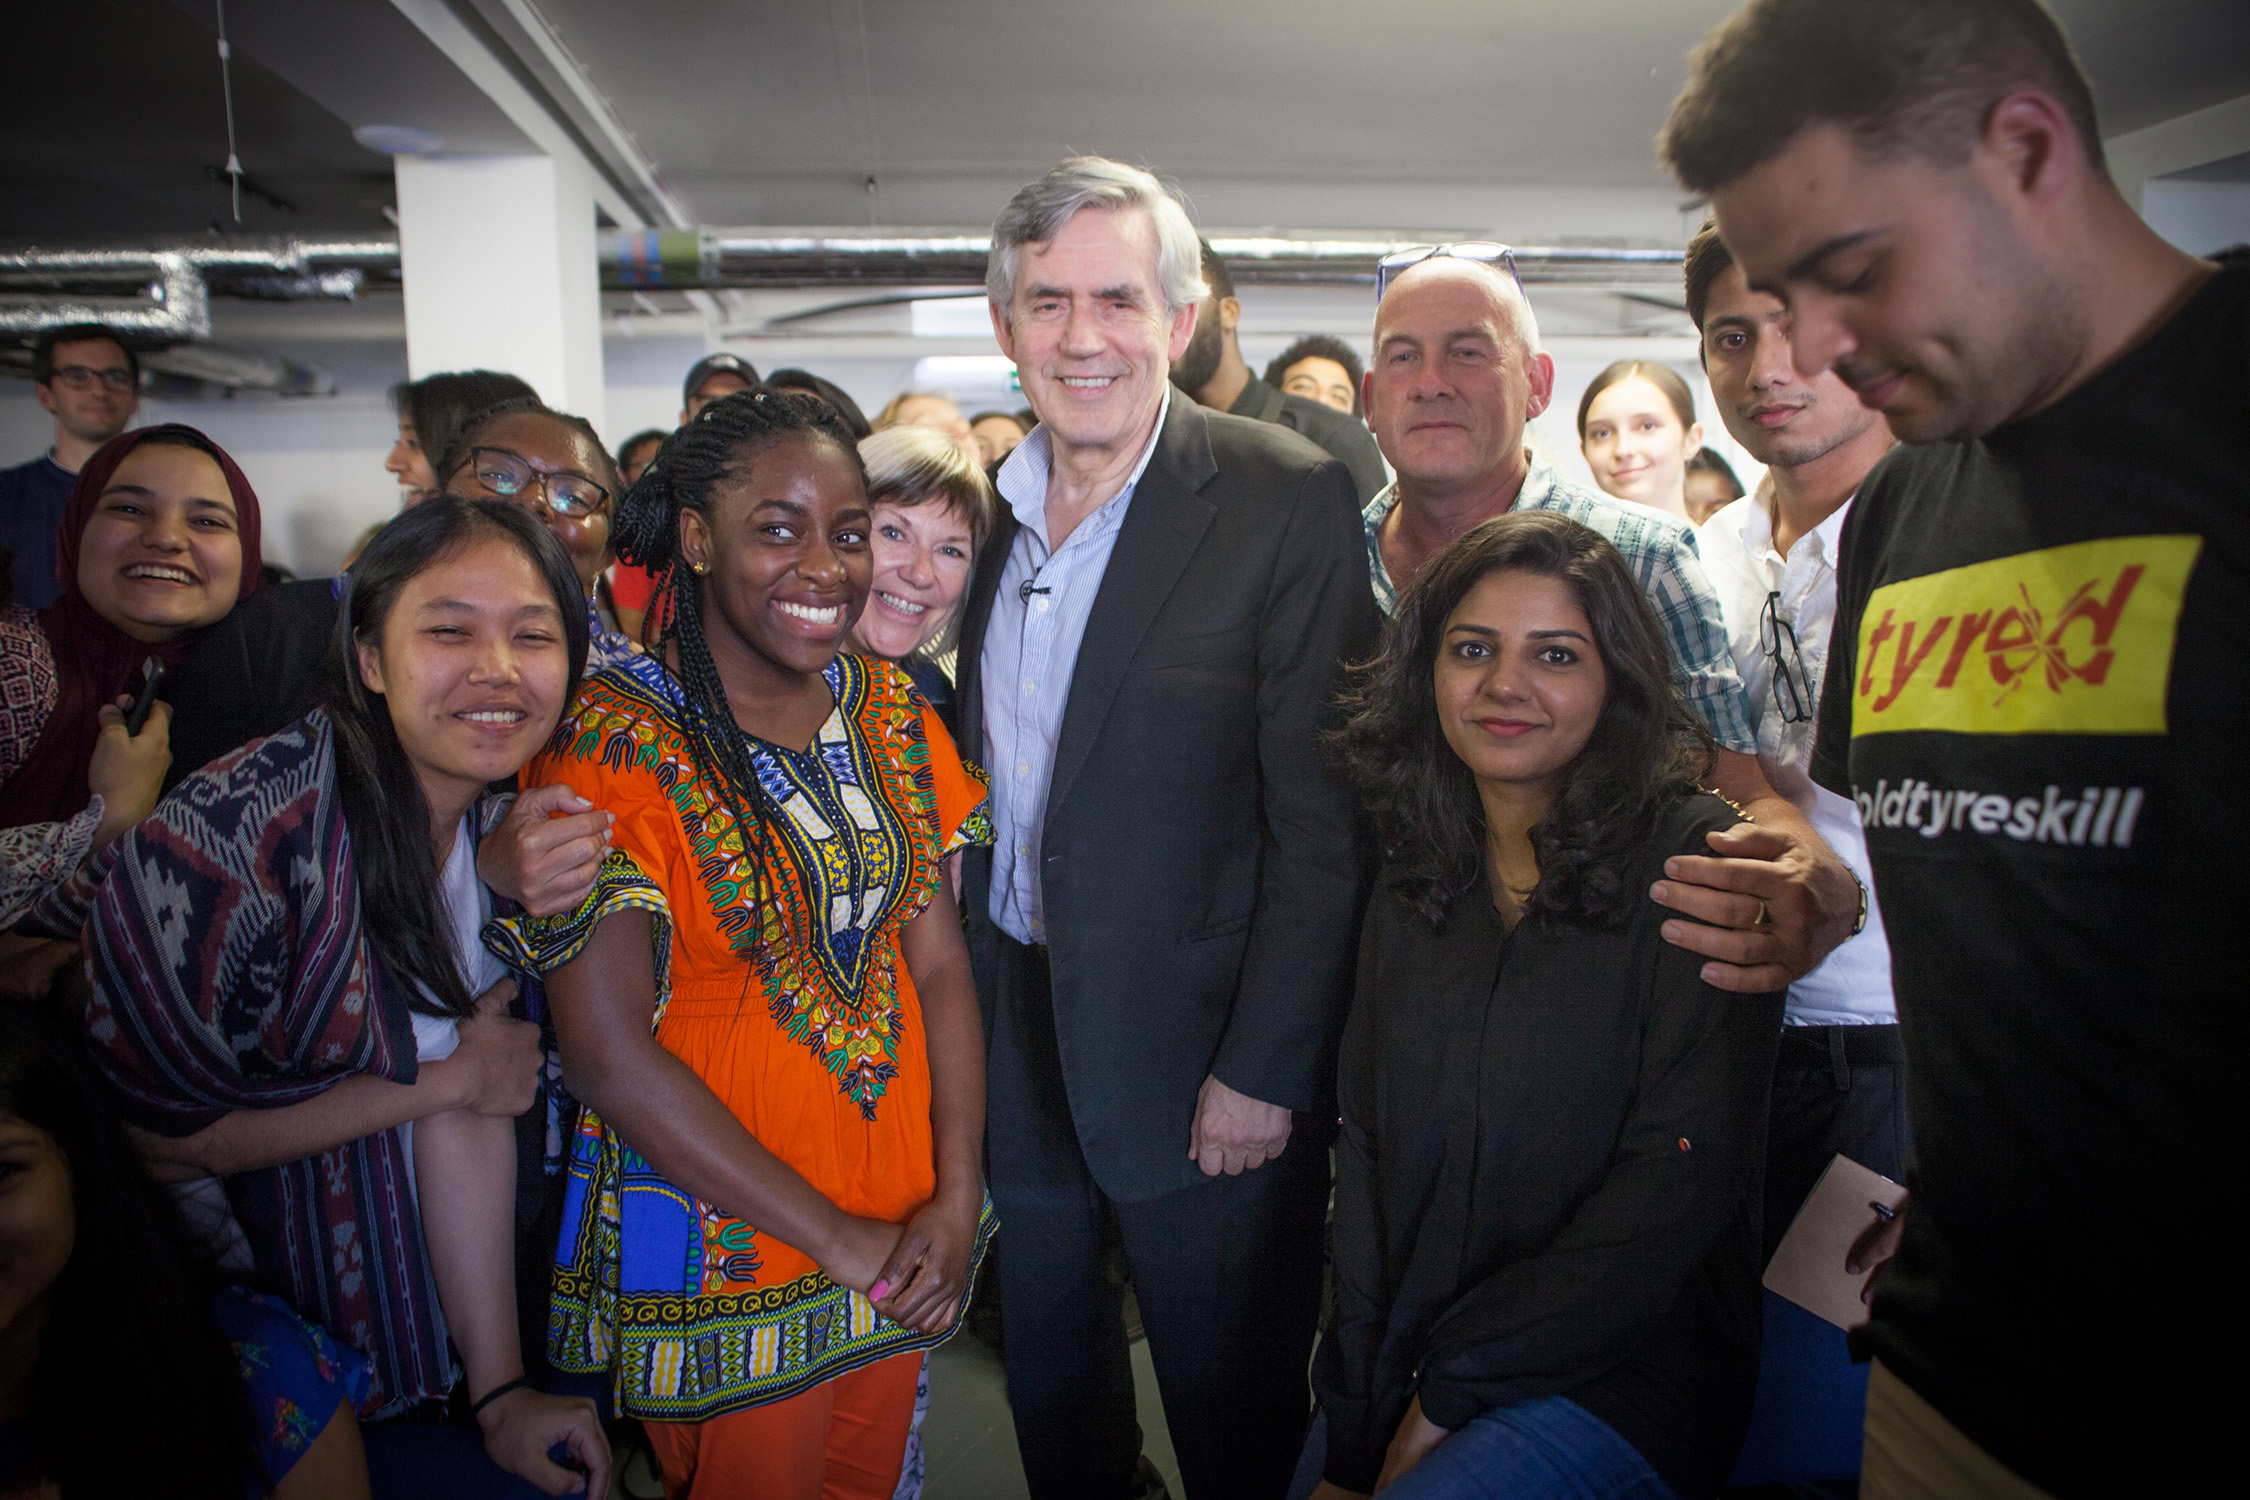 Former UK Prime Minister Gordon Brown, building new connections and understanding social value, Drivers for Change